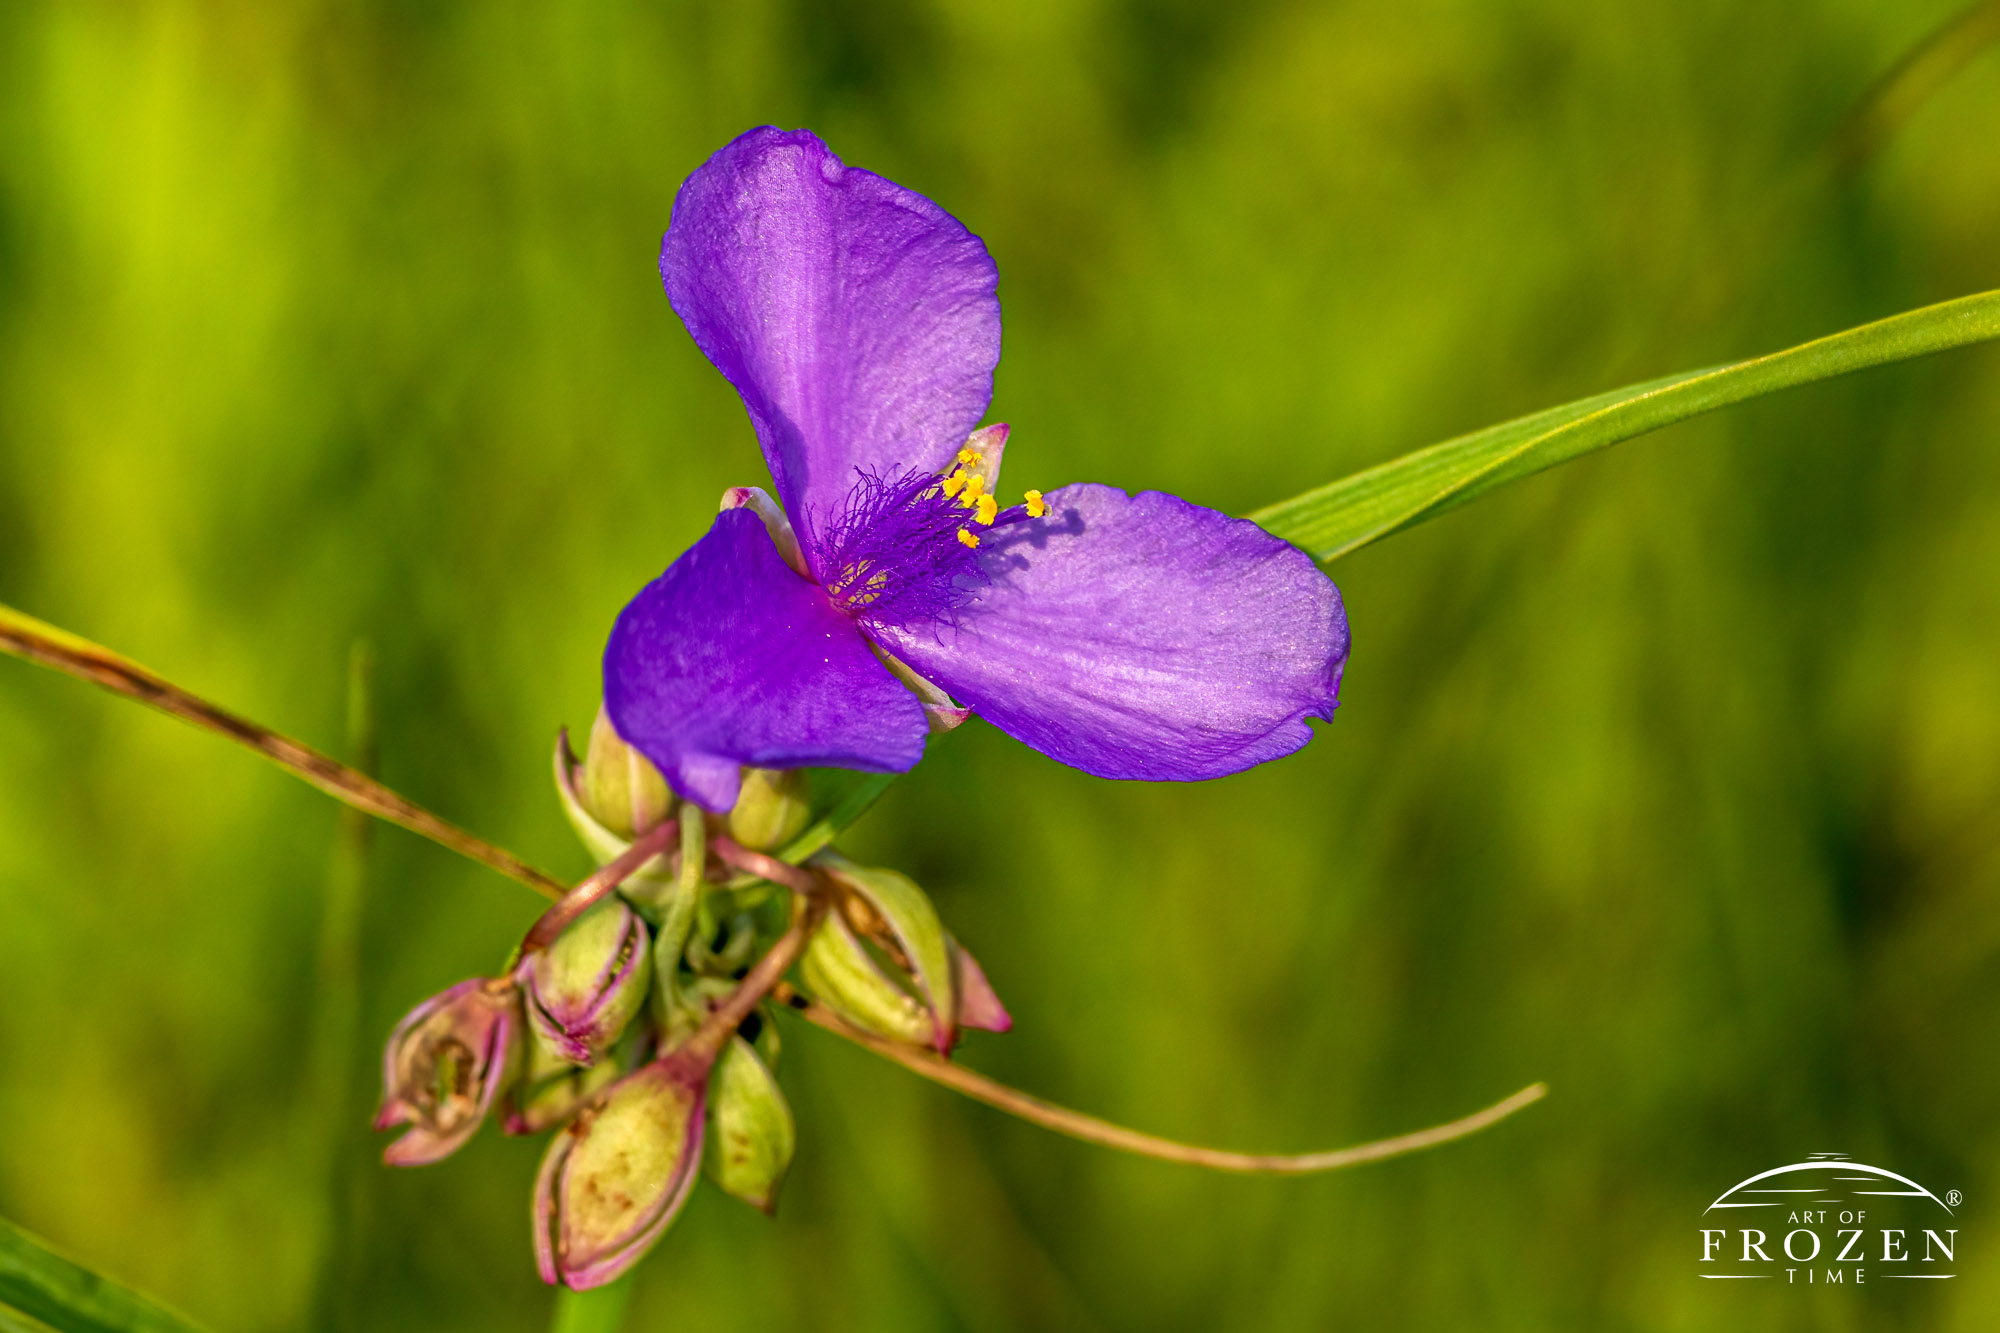 A close view of Ohio Spiderwort blooming in the golden morning light